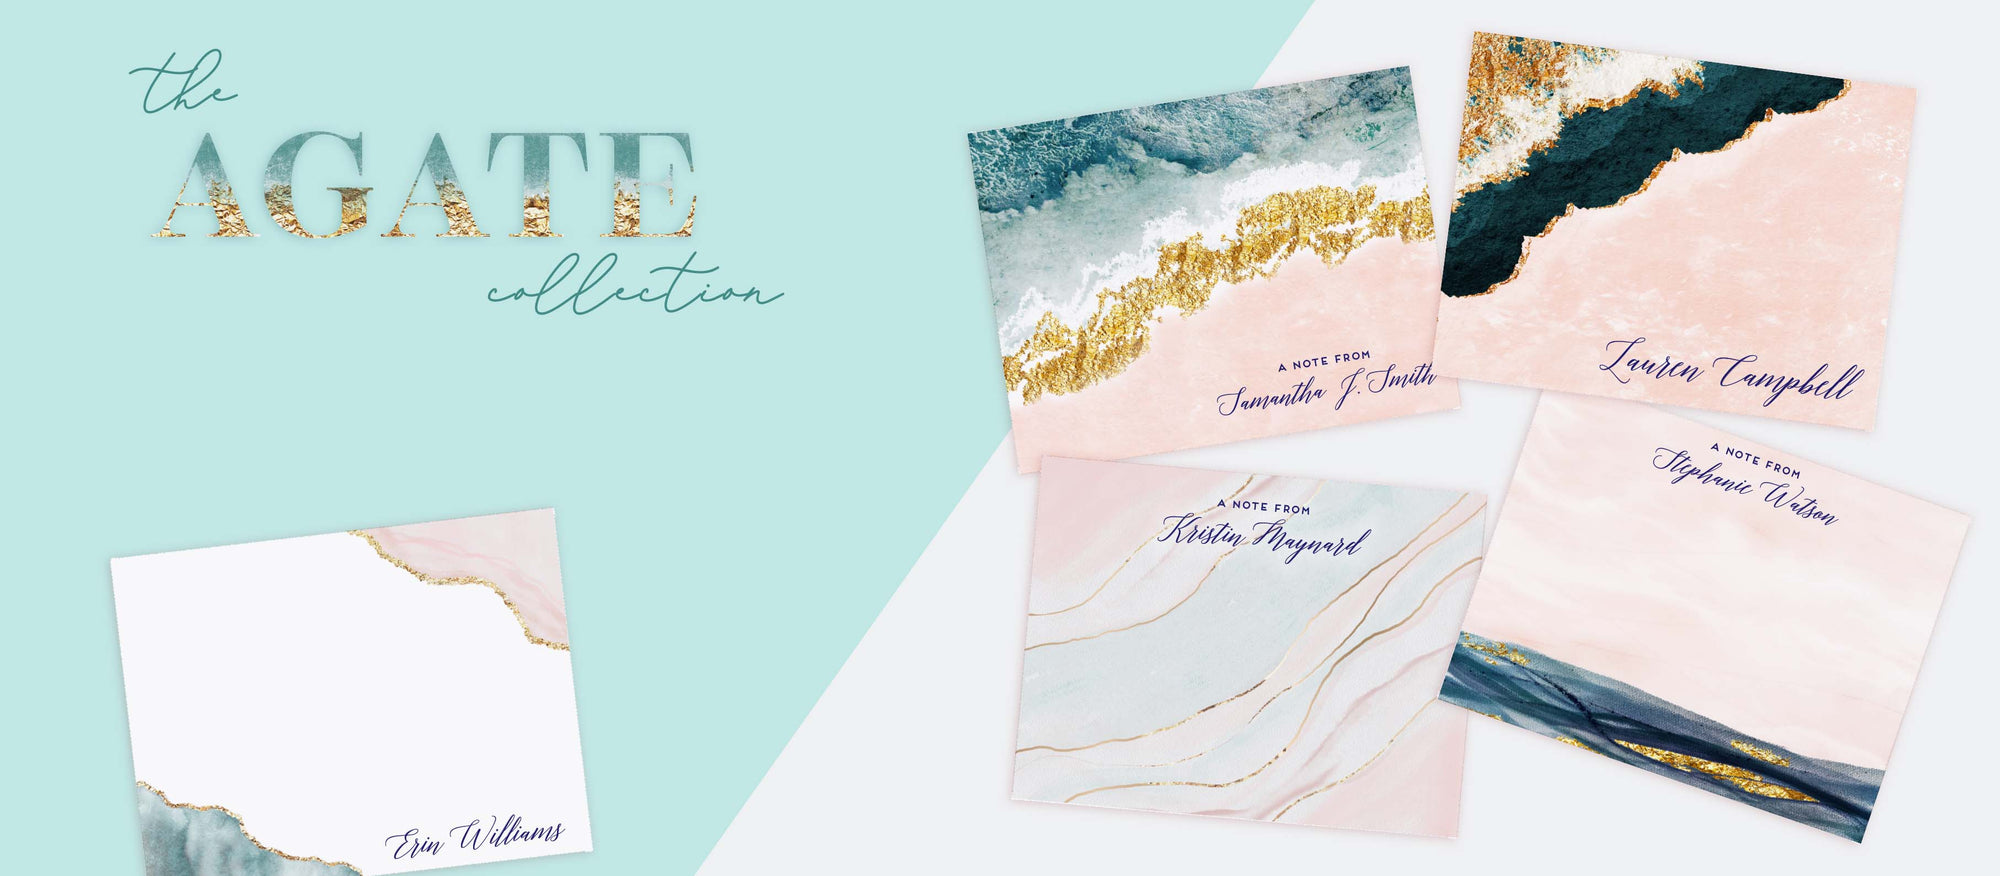 Shop Agate Stationery, note cards and notepads